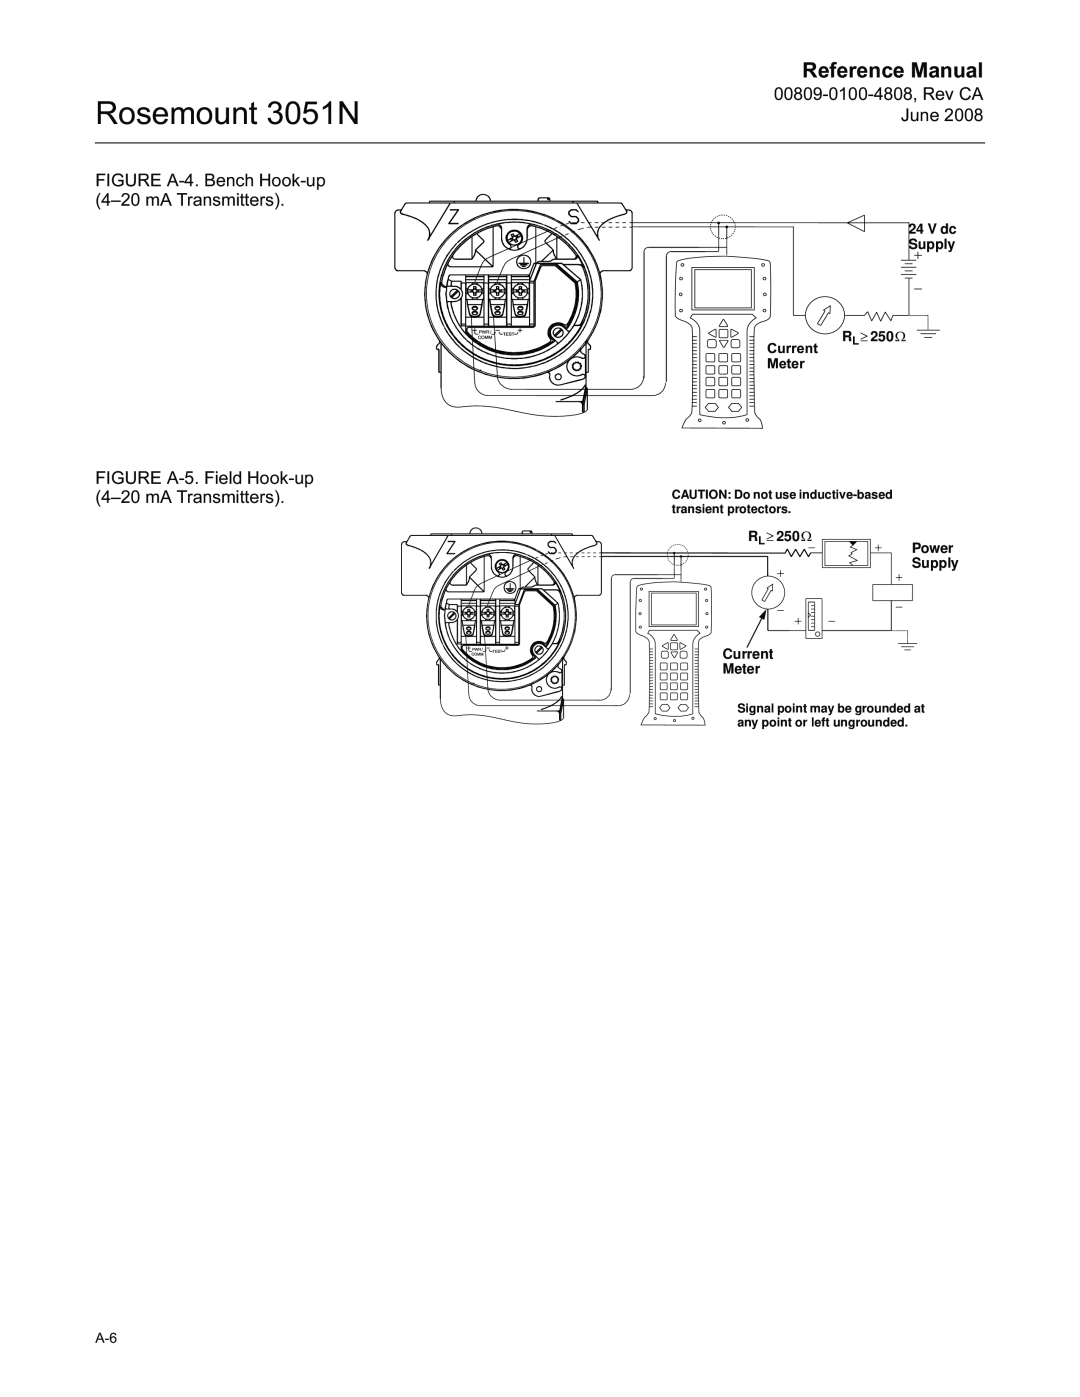 Emerson Rosemount 3051N, Reference Manual, 00809-0100-4808,Rev CA June, FIGURE A-4.Bench Hook-up 4–20mA Transmitters 